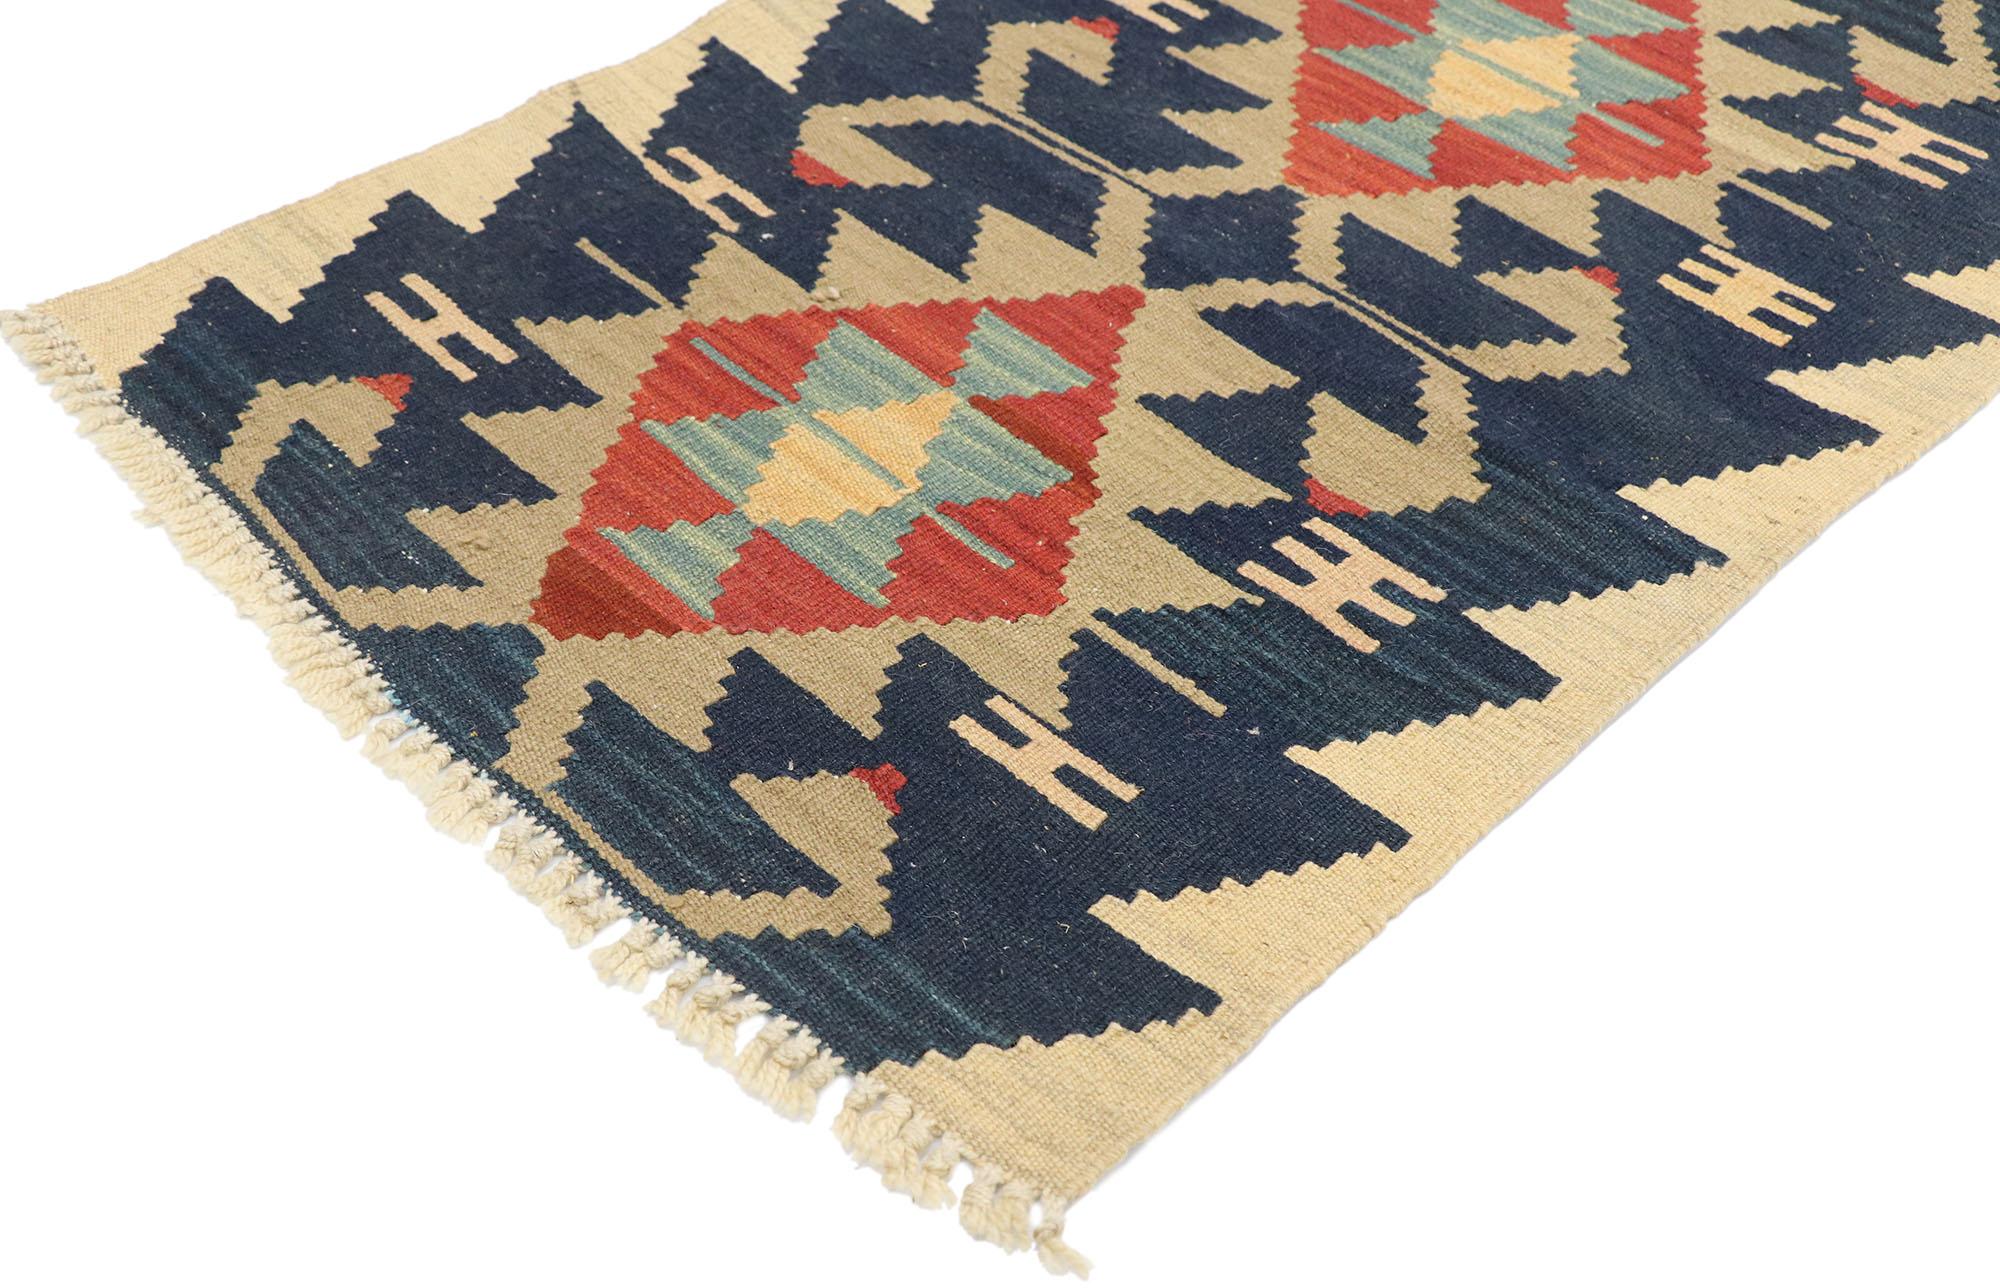 77862, Vintage Persian Shiraz Kilim rug with Tribal Style 02'00 x 02'11. Full of tiny details and a bold expressive design combined with vibrant colors and tribal style, this hand-woven wool vintage Persian Shiraz kilim rug is a captivating vision